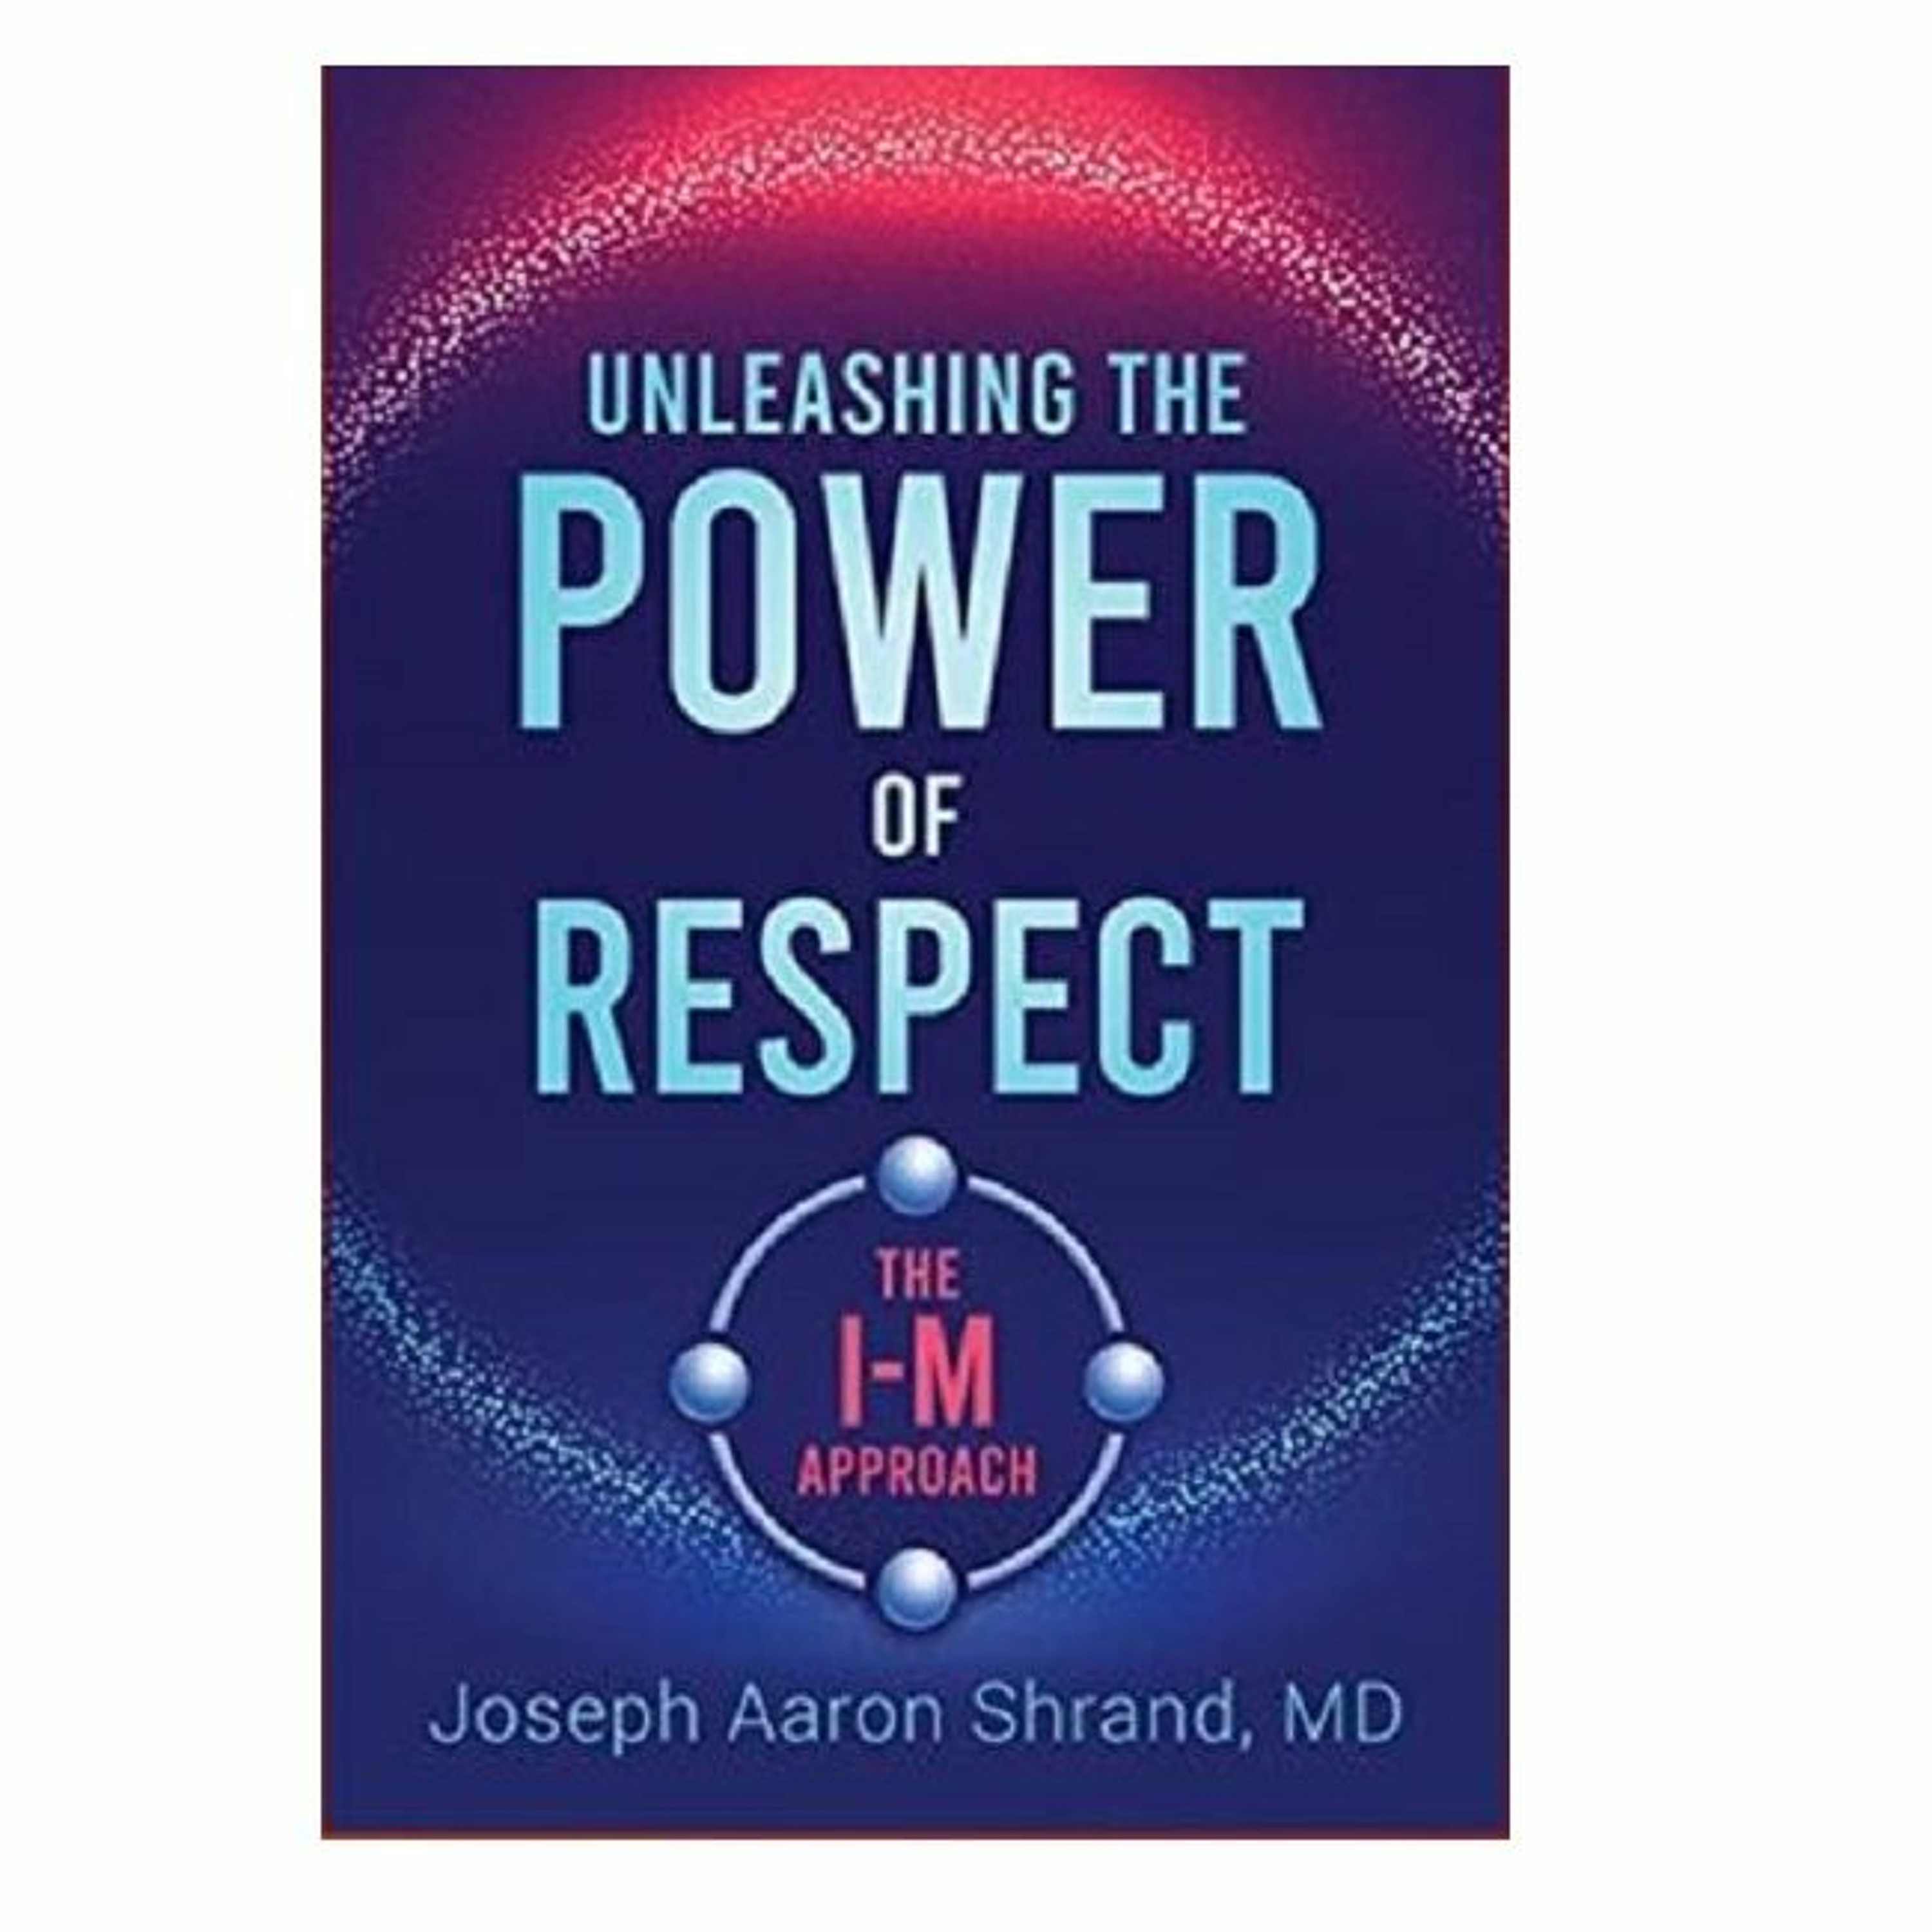 Podcast 937: Unleashing the Power of Respect: The I-M Approach with Dr. Joseph Shrand